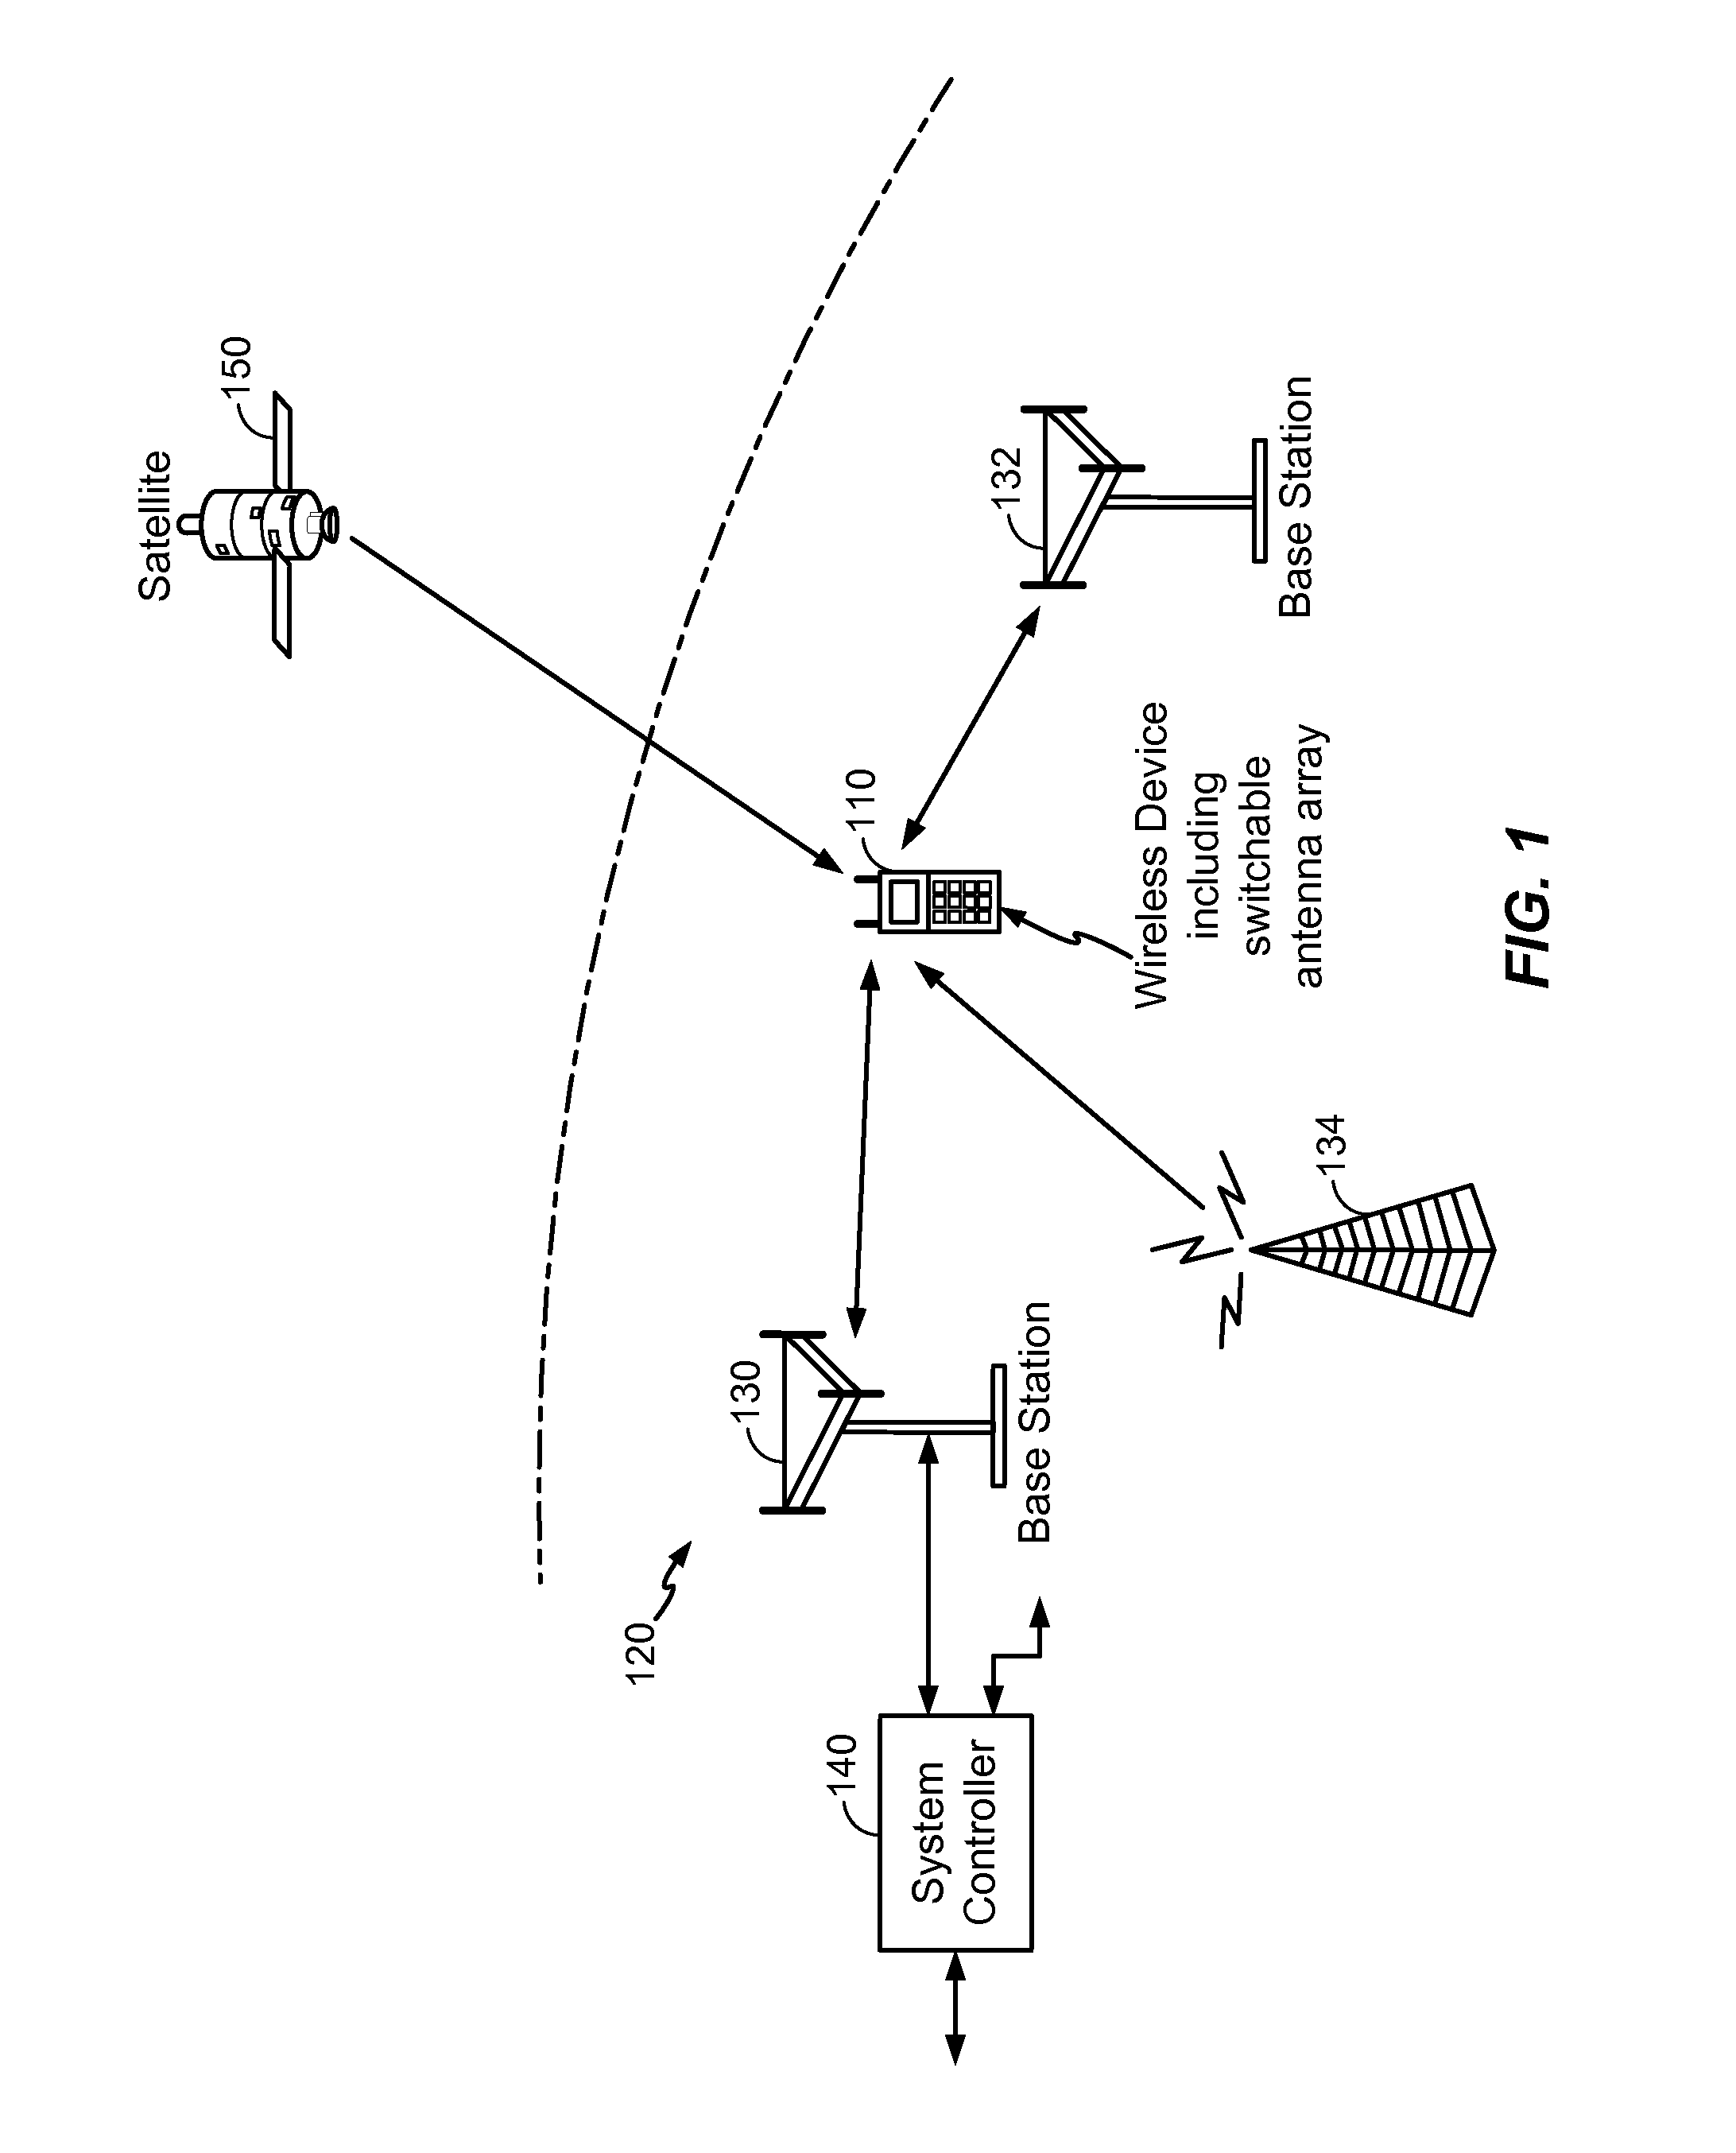 Switchable antenna array